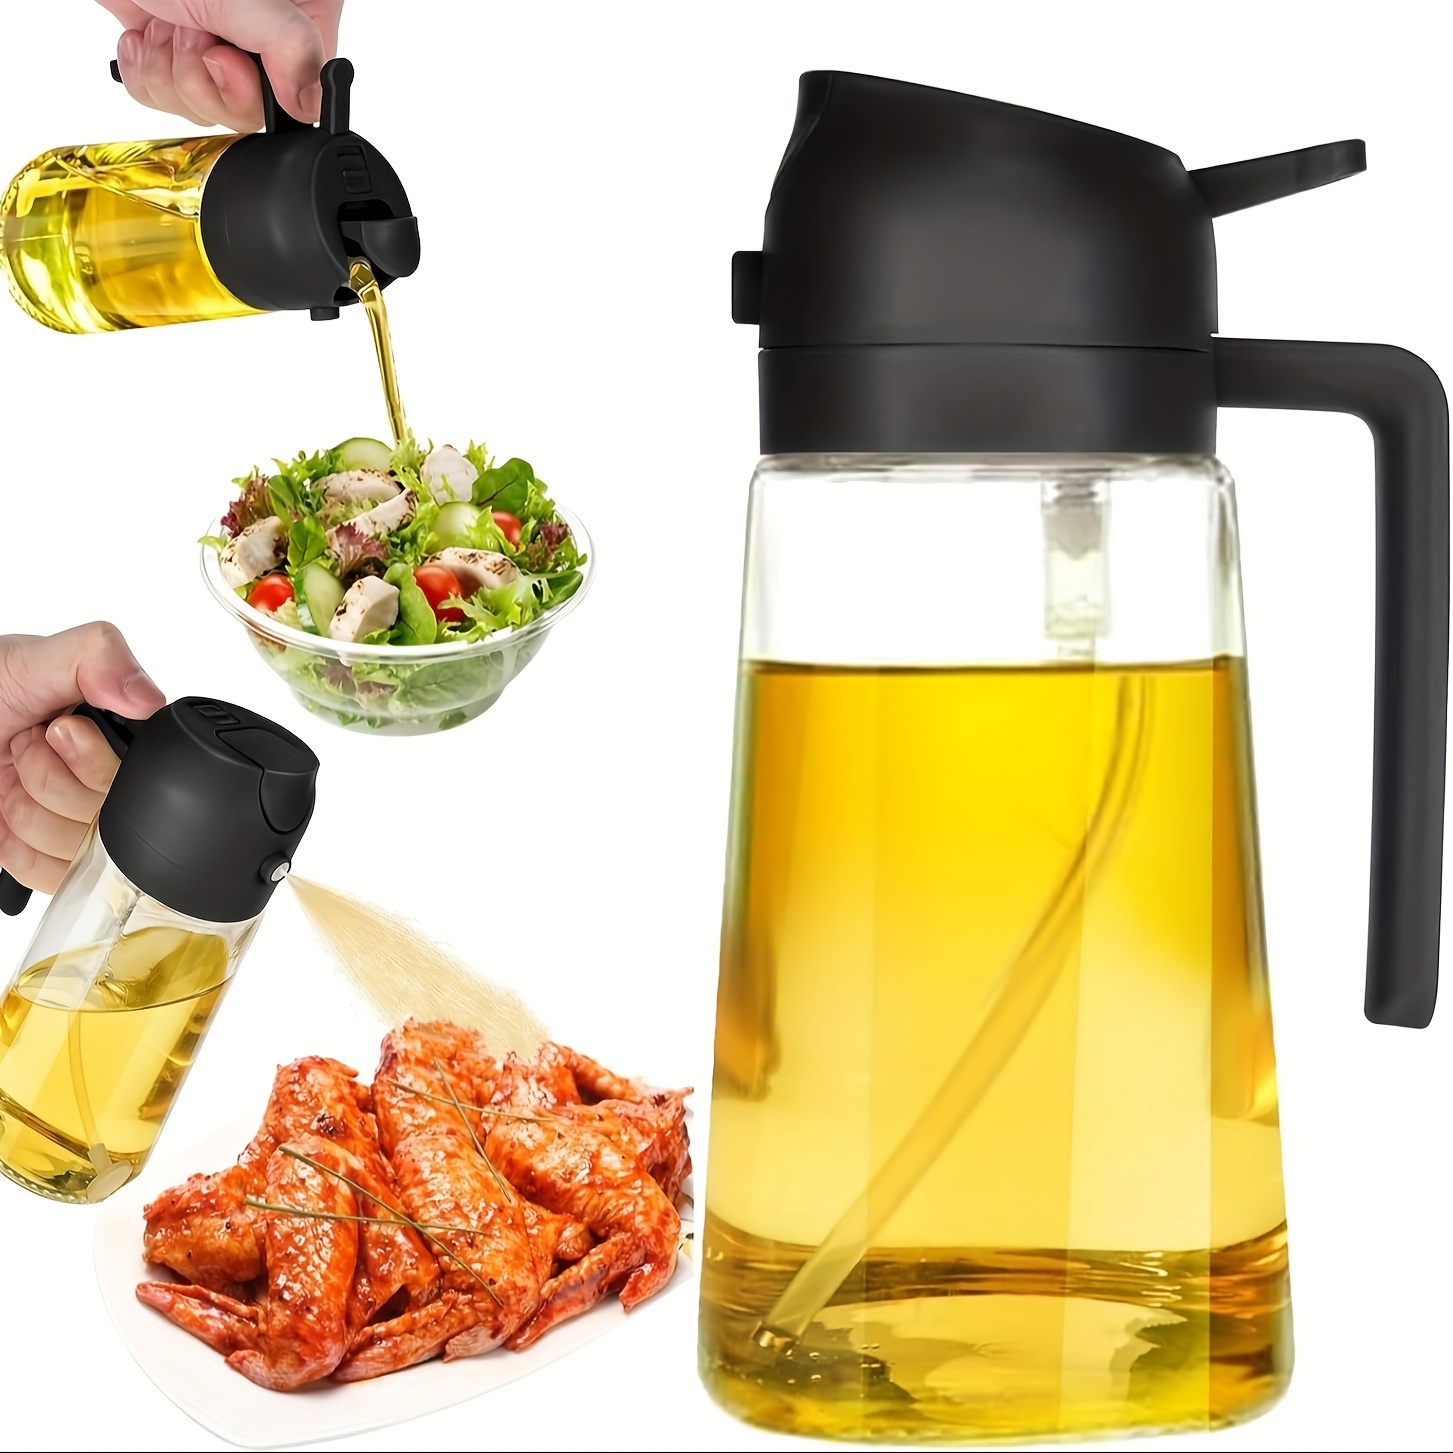 

Bpa-free Glass Oil Dispenser Bottle 470ml - Round Hand-wash Olive Oil & Vinegar Sprayer 2-in-1 With Anti-clog Filter And Gravity Lid For Cooking, Baking, Grilling, Salads